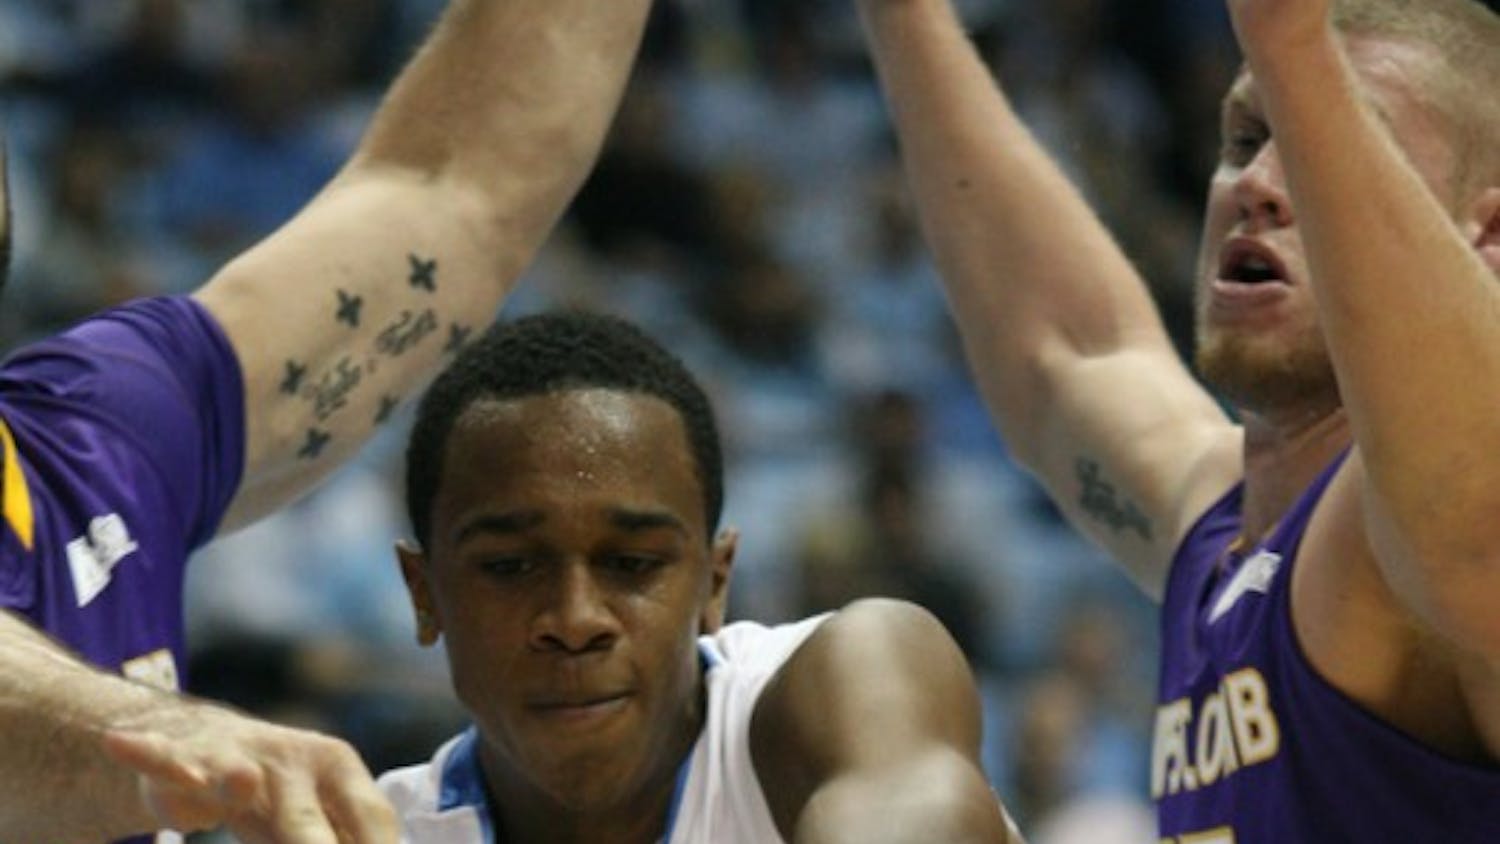 John Henson, seen here in UNC’s game against Lipscomb on Nov. 12, carried the load inside with Zeller’s foul trouble, scoring 16 points.